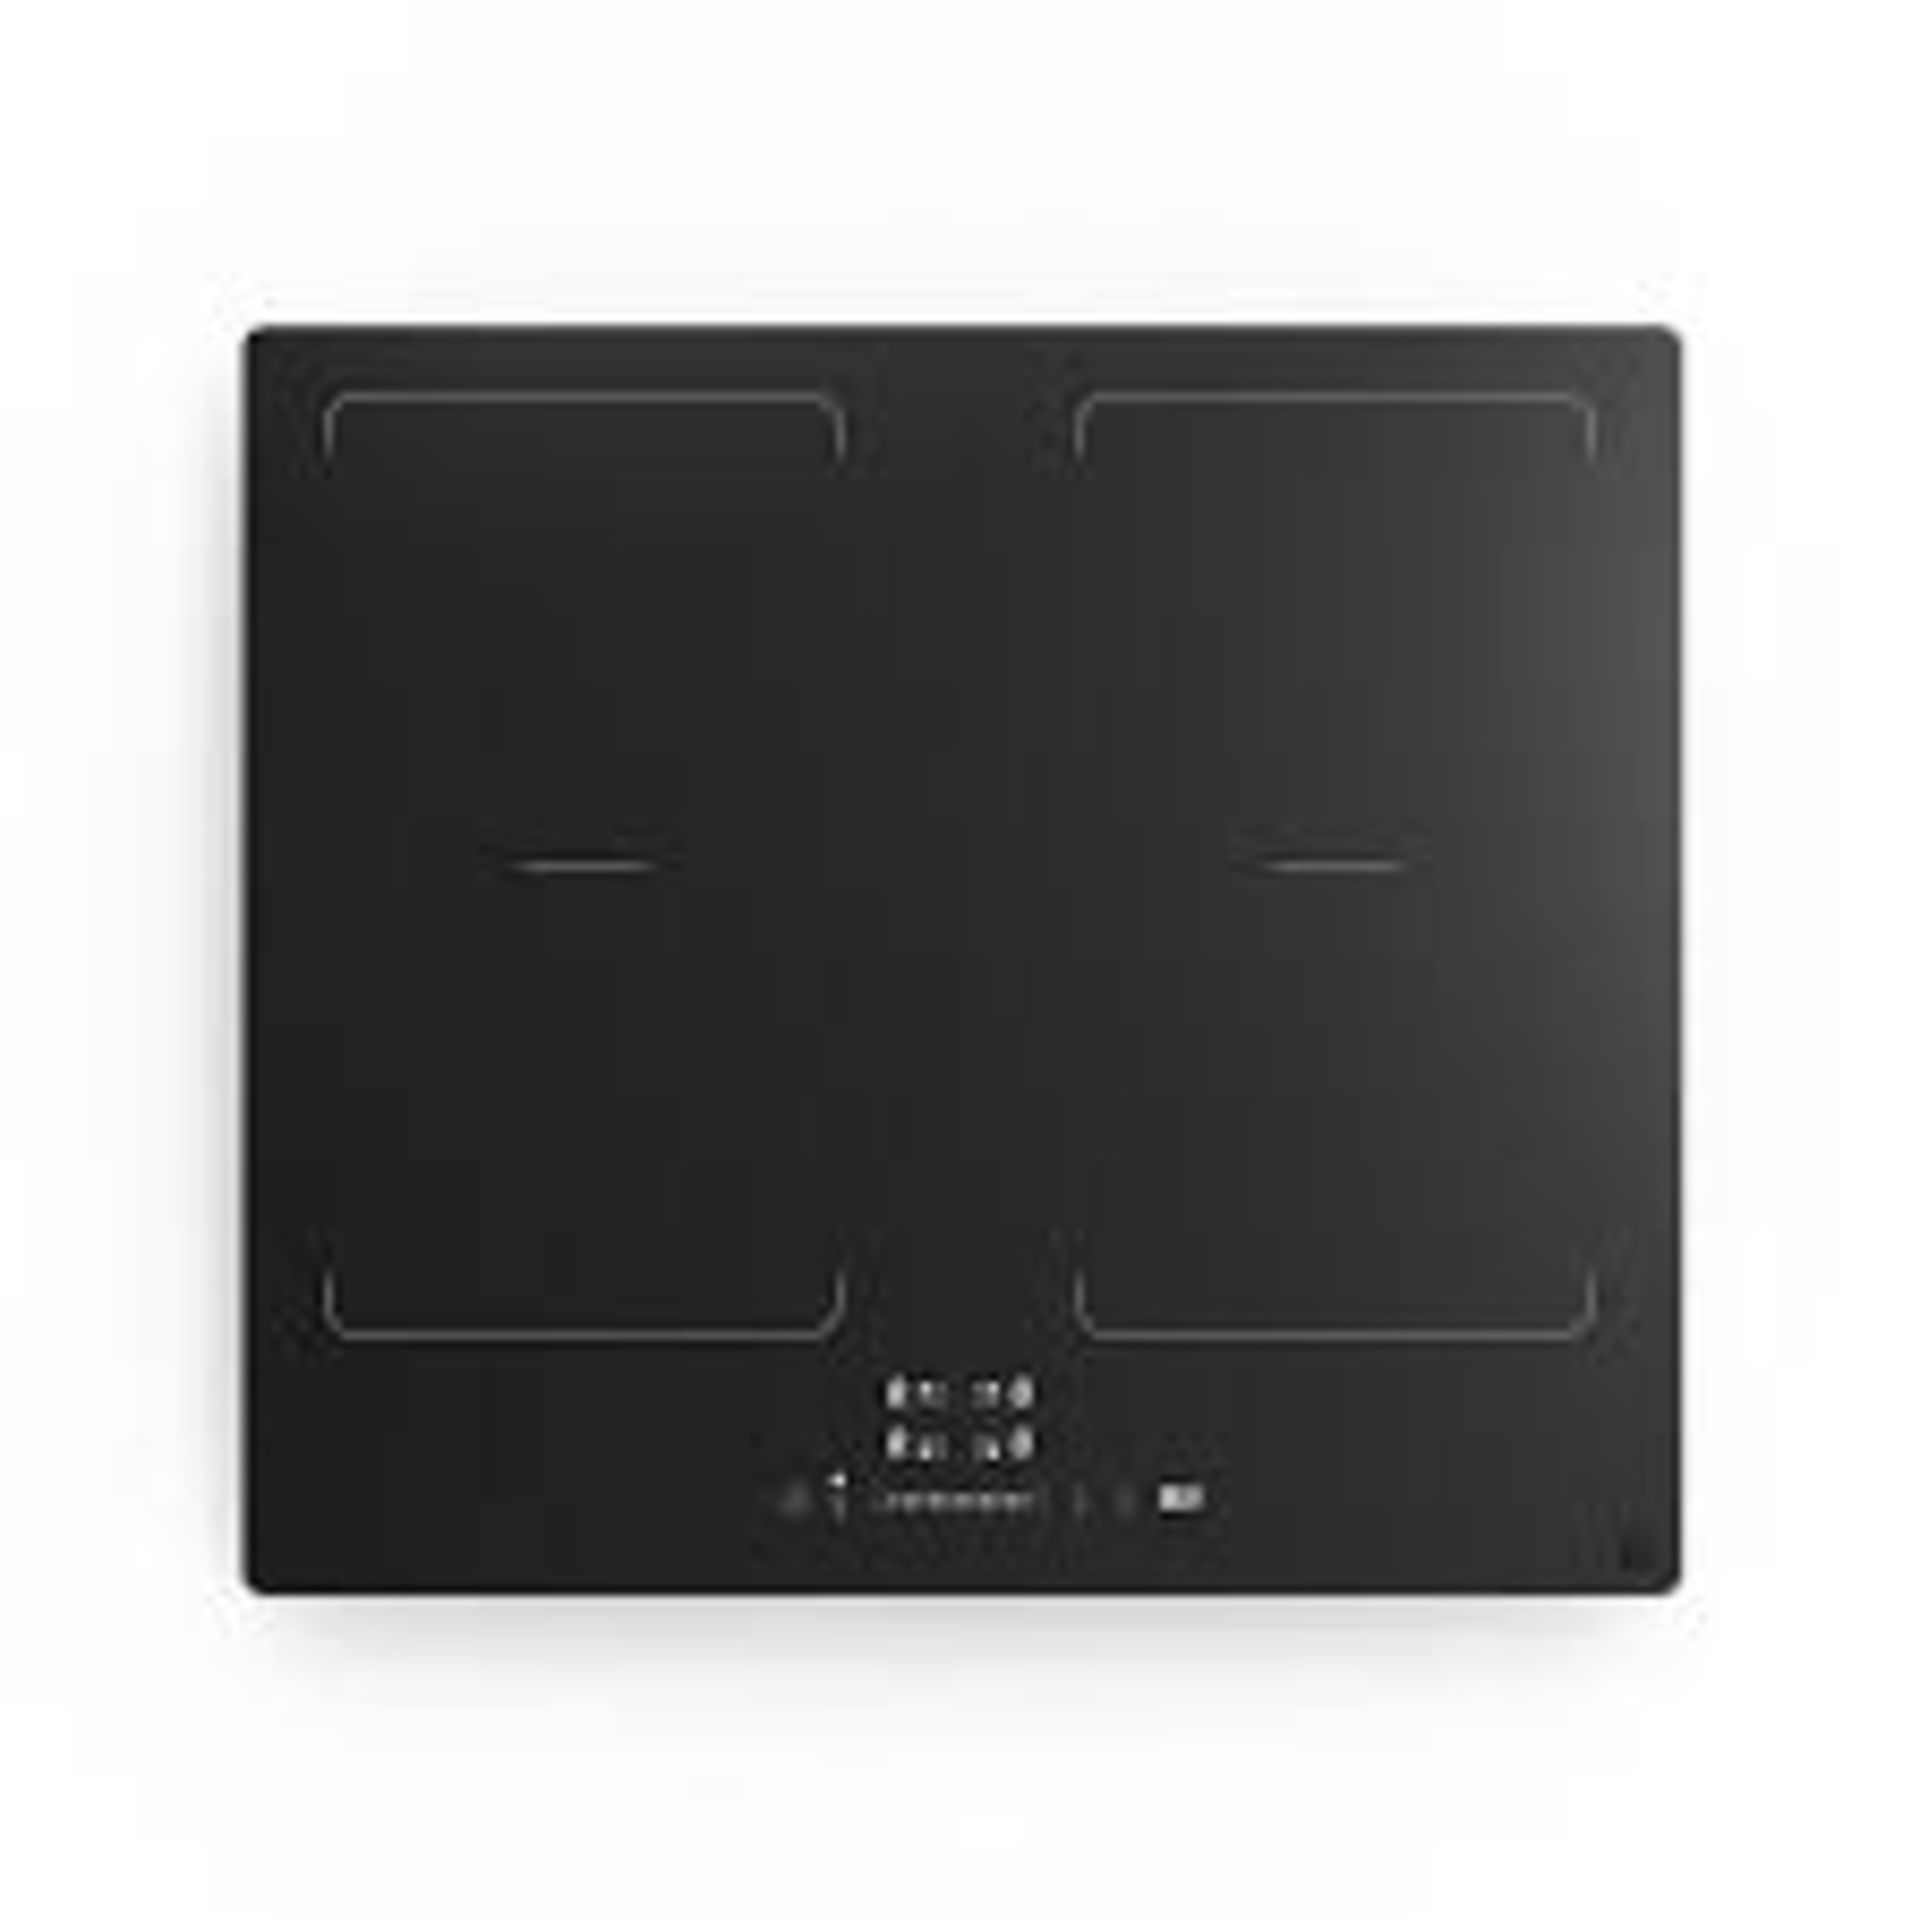 GoodHome Linksense GH4ZFXLK60 59cm Induction Hob - Black. - S2. Our GoodHome appliances are packed